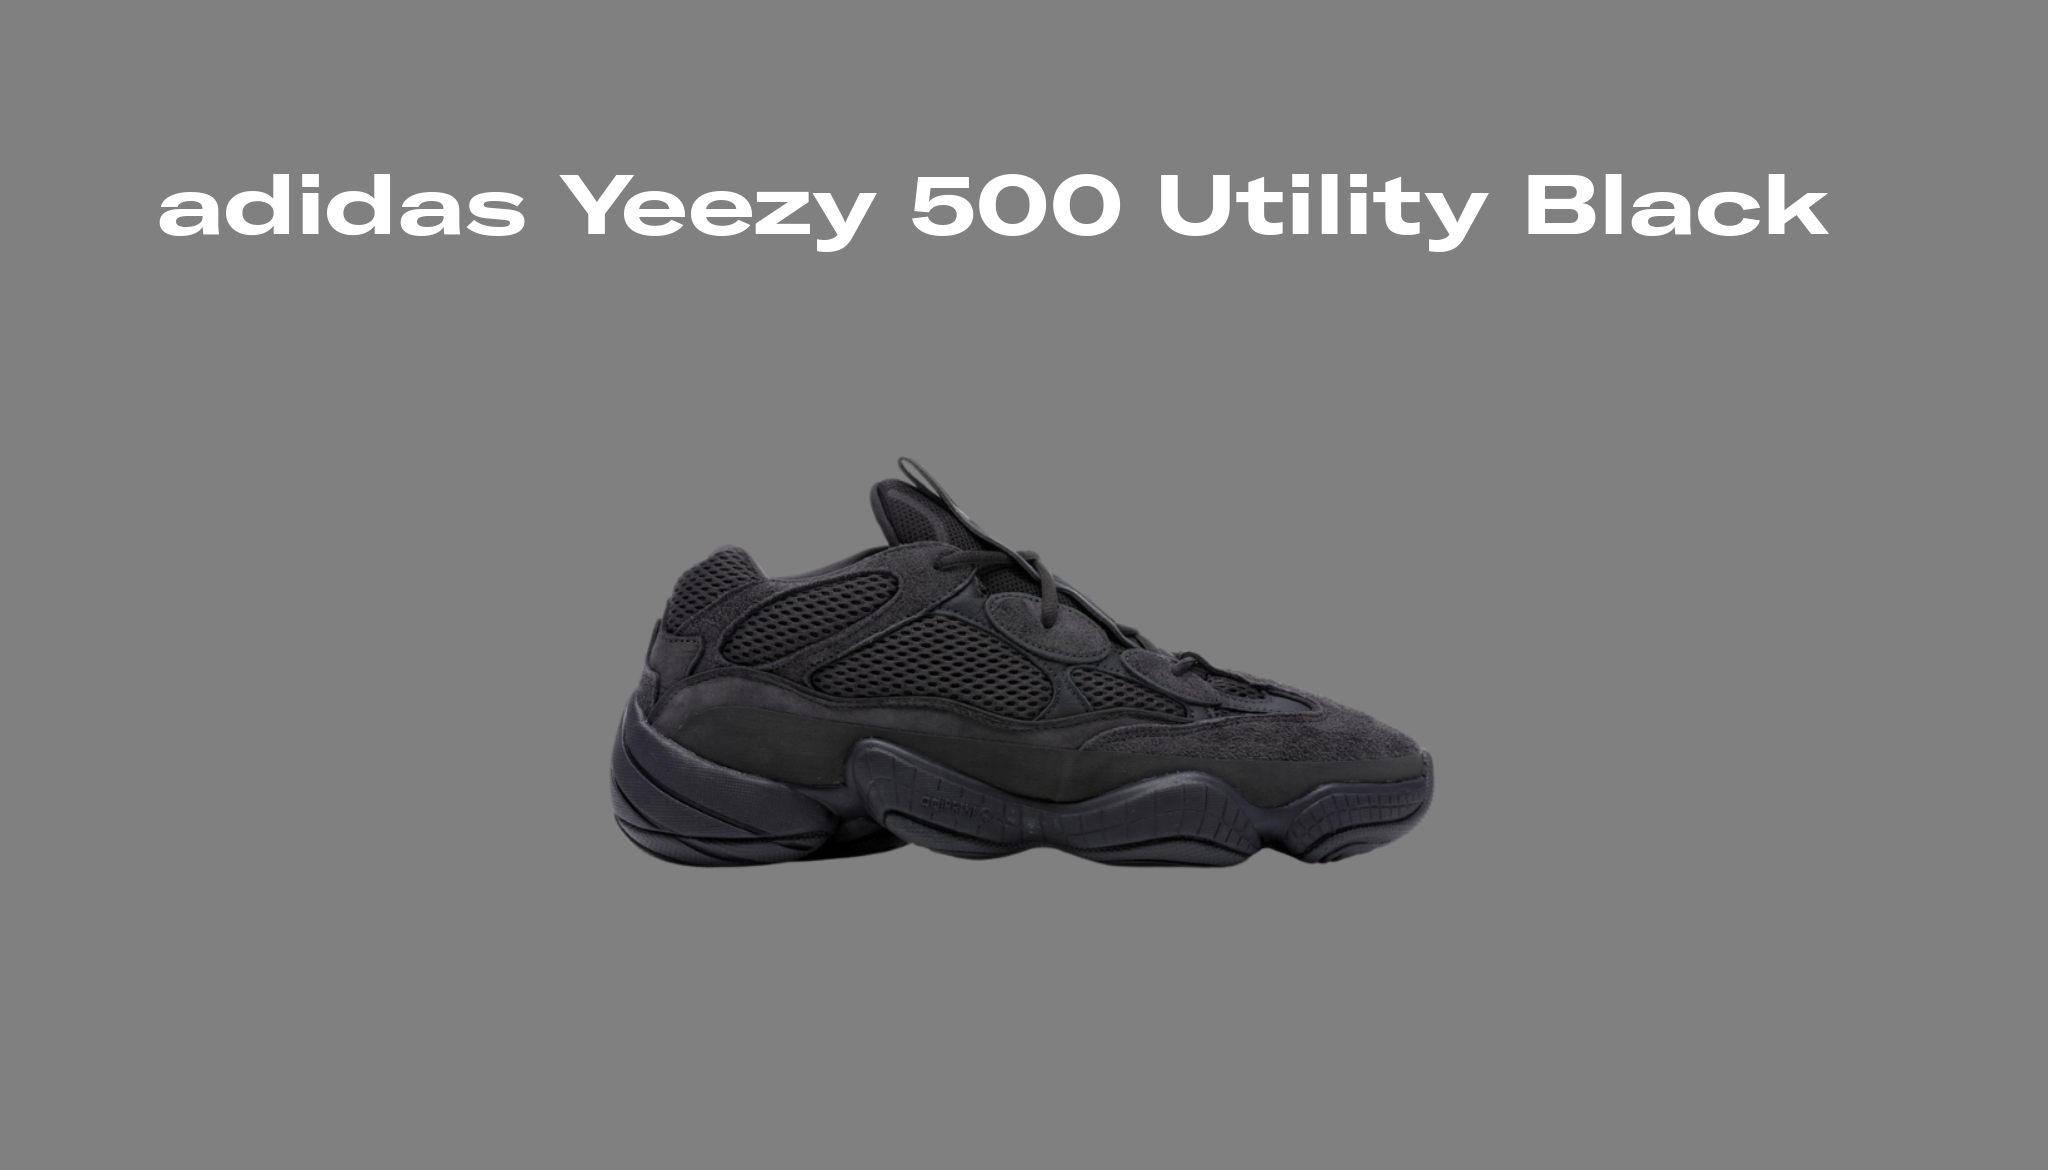 adidas Yeezy 500 Utility Black, Raffles and Release Date | Sole